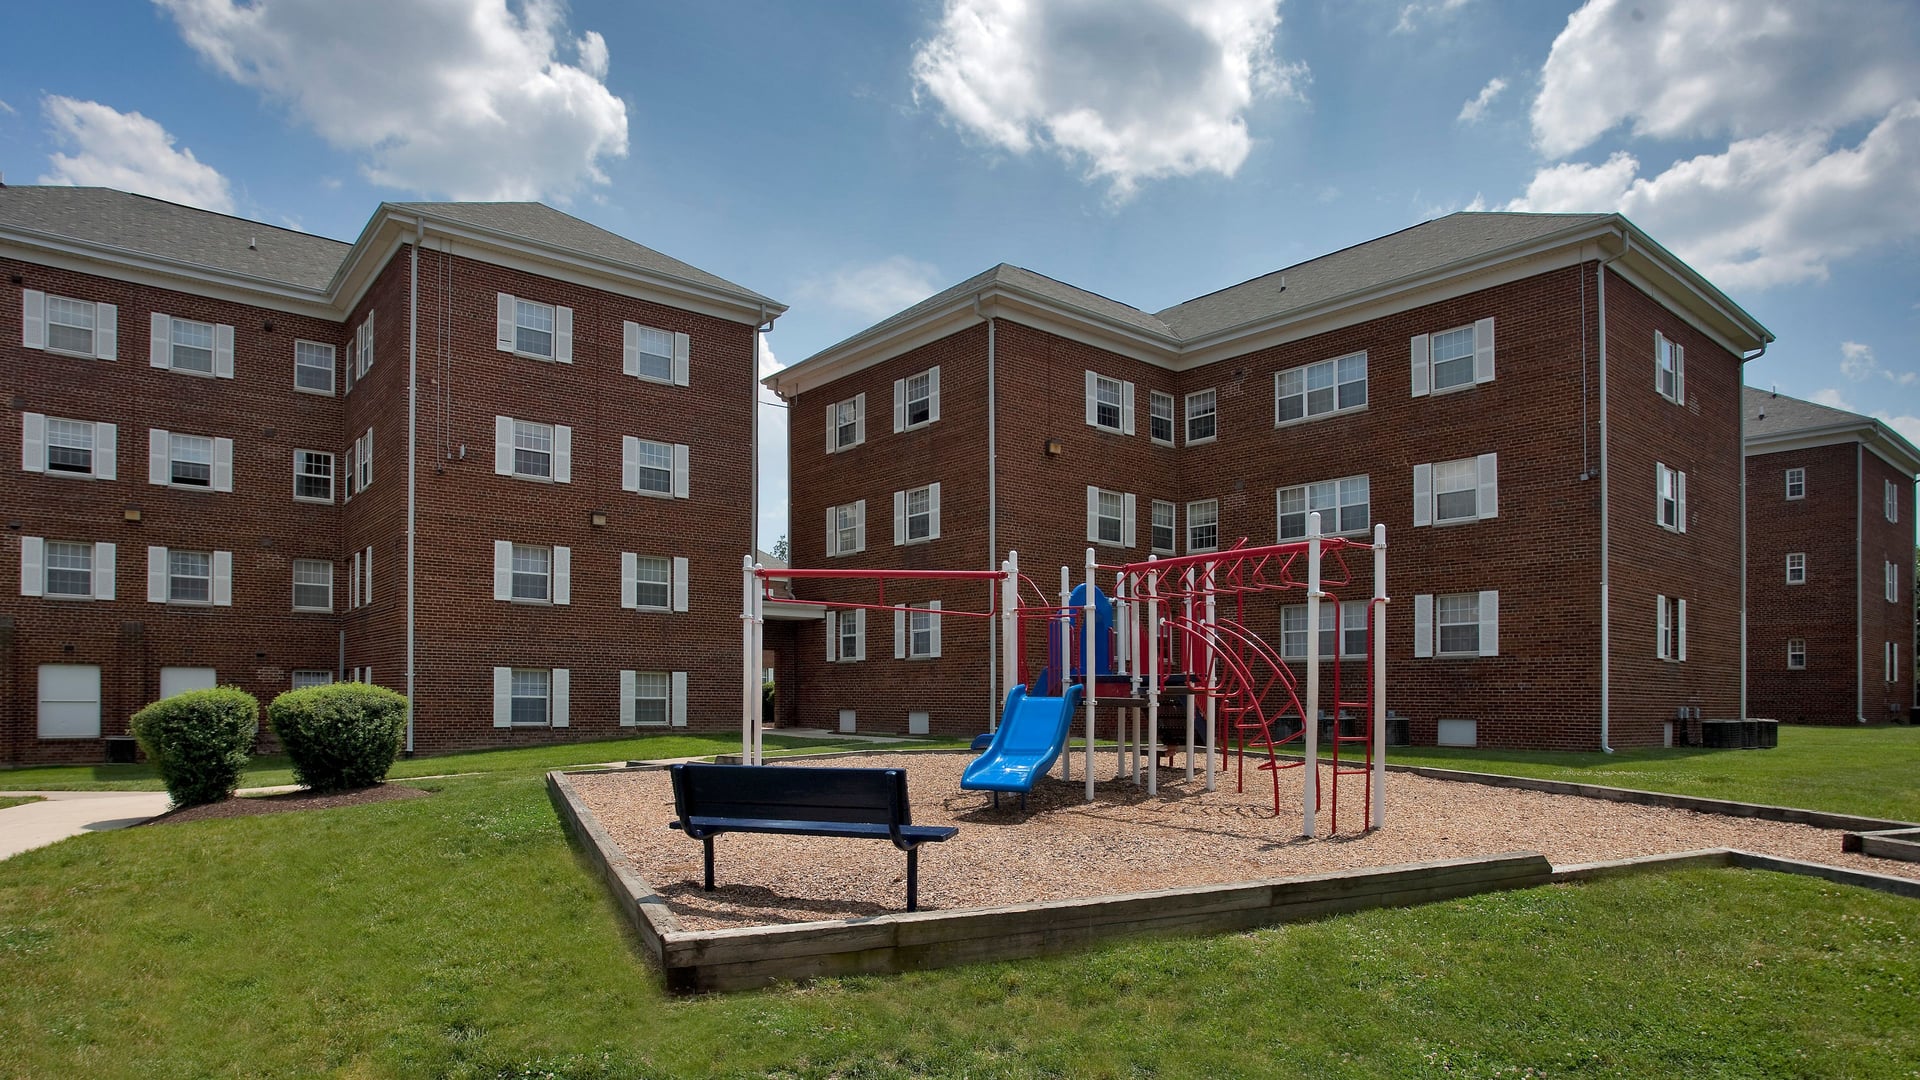 2 Bedroom Apartments In Md Under 1200 Search Your Favorite Image